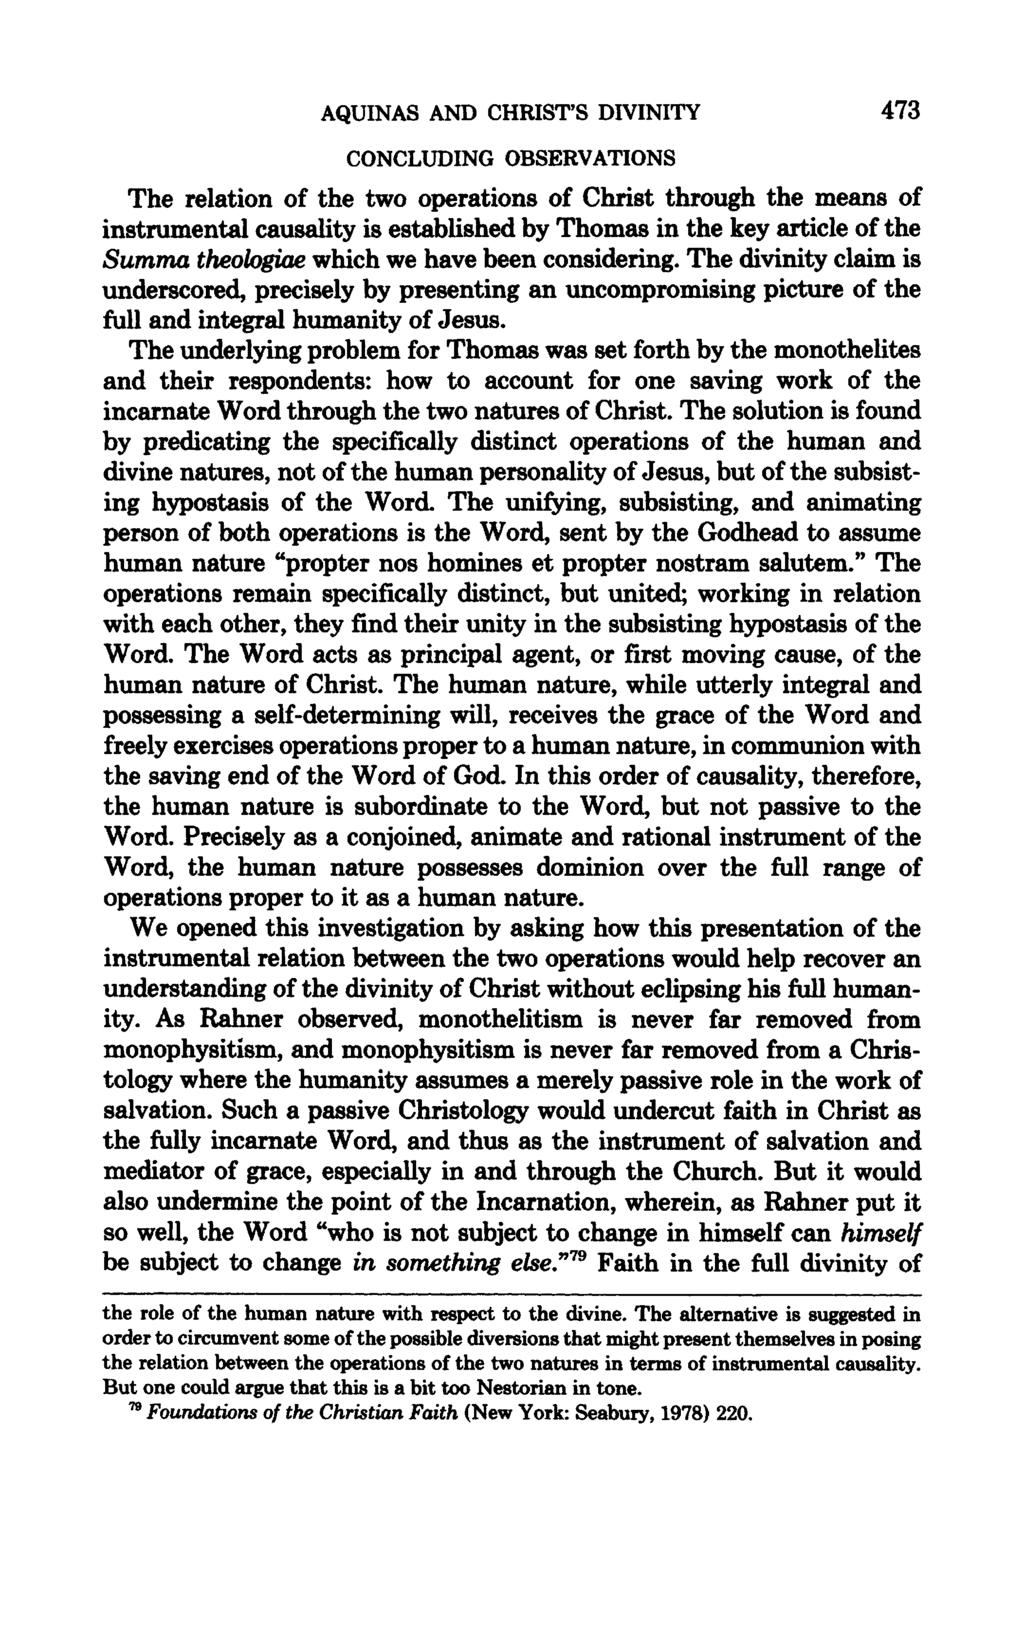 AQUINAS AND CHRIST'S DIVINITY 473 CONCLUDING OBSERVATIONS The relation of the two operations of Christ through the means of instrumental causality is established by Thomas in the key article of the